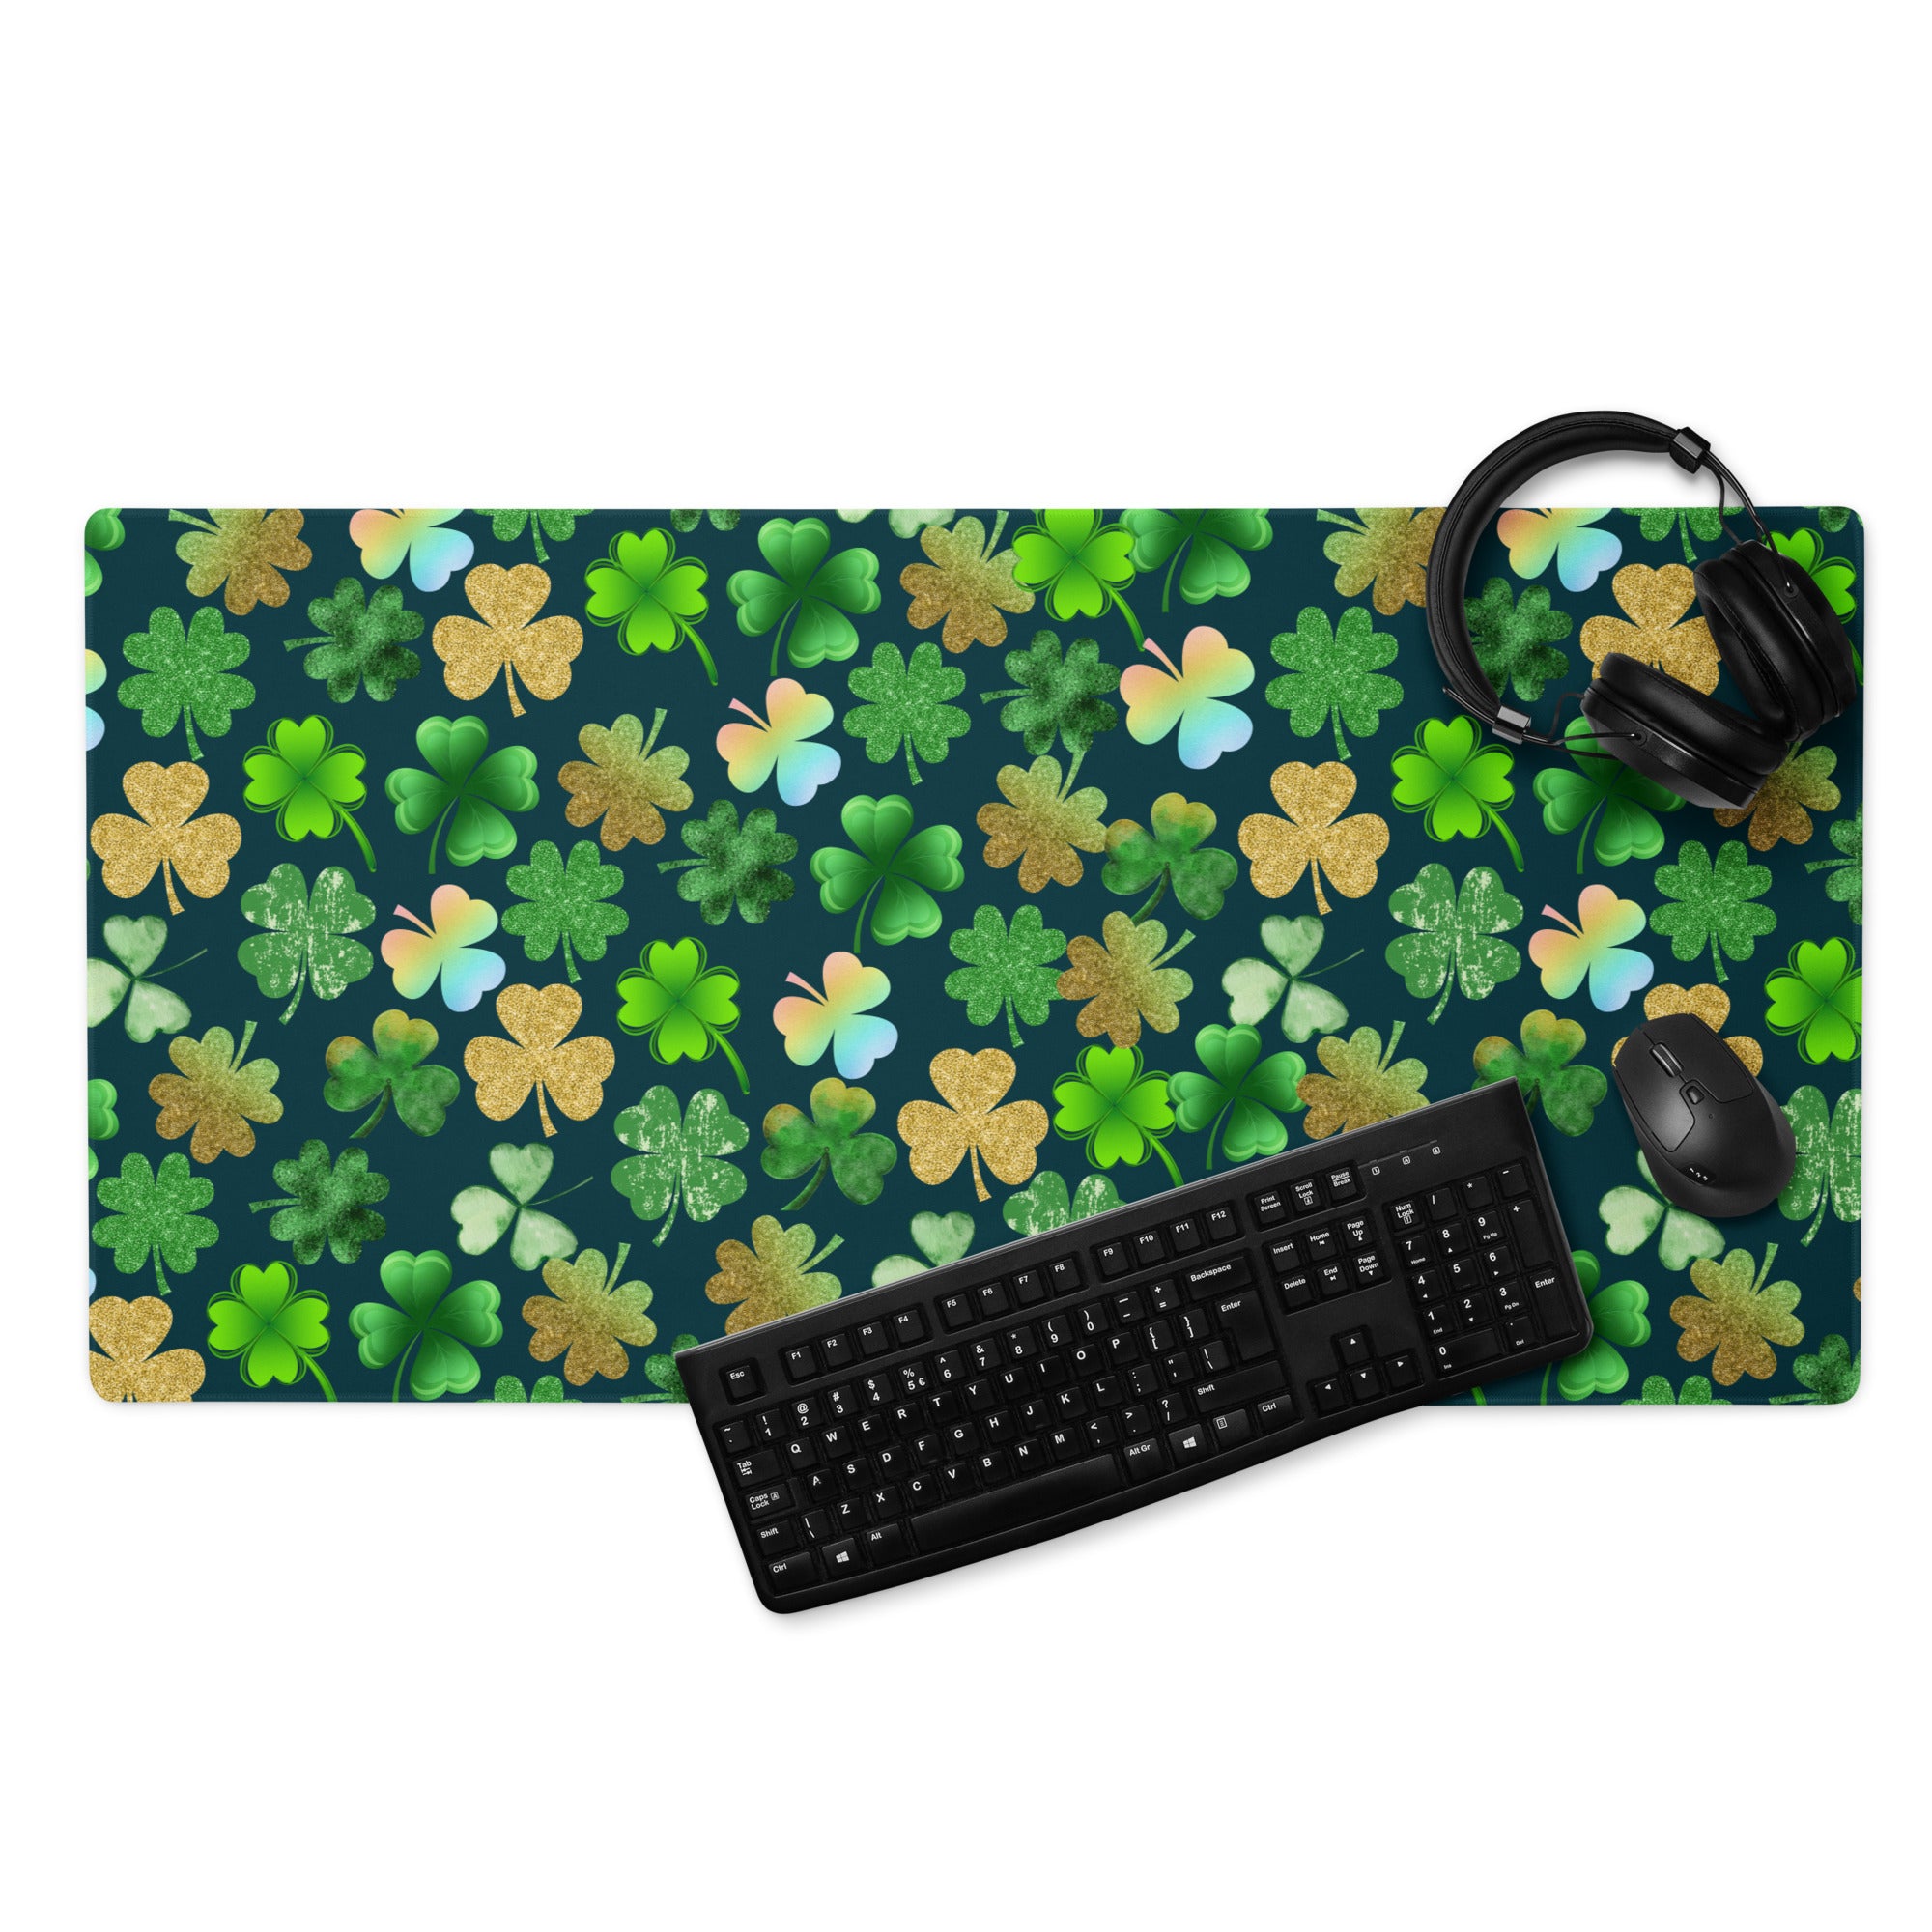 Shamrock Gaming mouse pad Landscape Gaming Mouse Pad with RGB Led, Large Gaming Mouse Pad, Extended Mouse Pad for Gamers